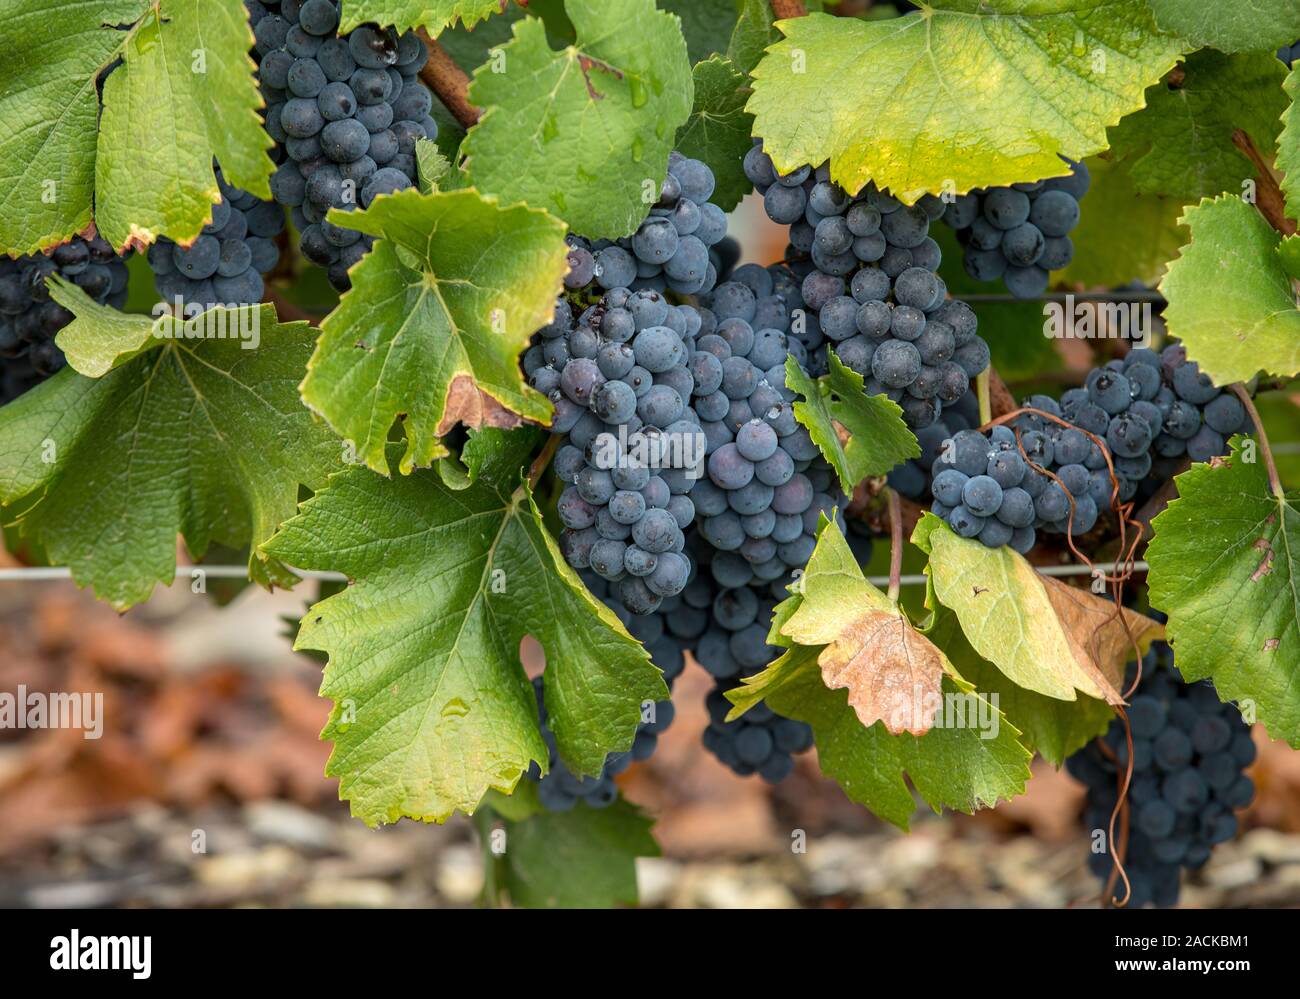 Champagne vineyards in the Cote des Bar area of the Aube department. France Stock Photo